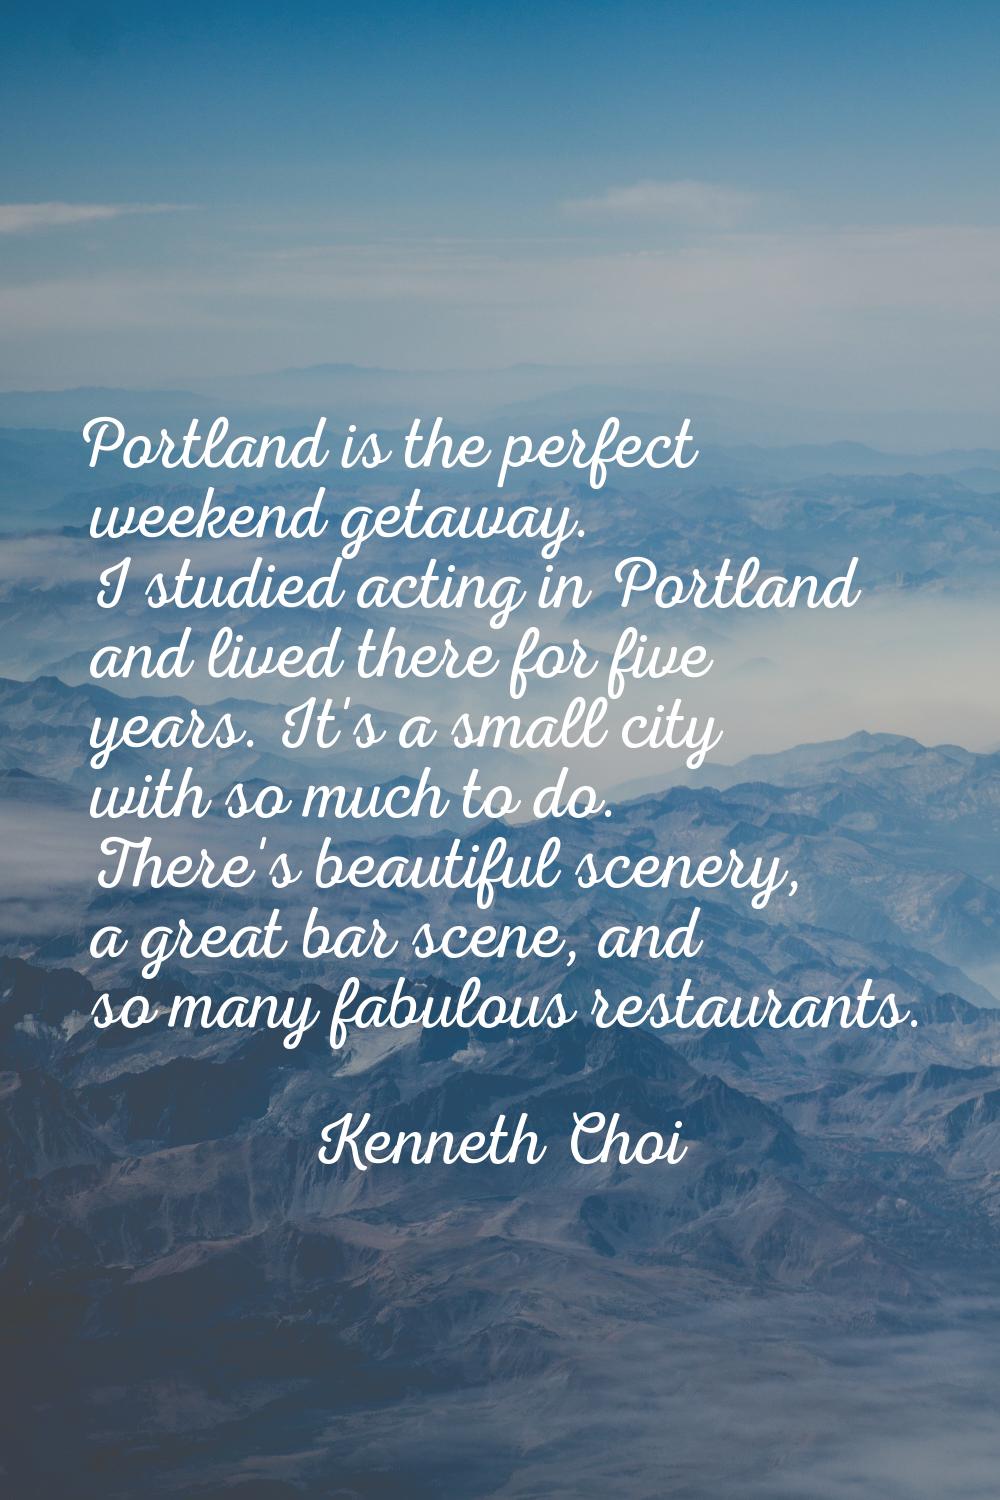 Portland is the perfect weekend getaway. I studied acting in Portland and lived there for five year